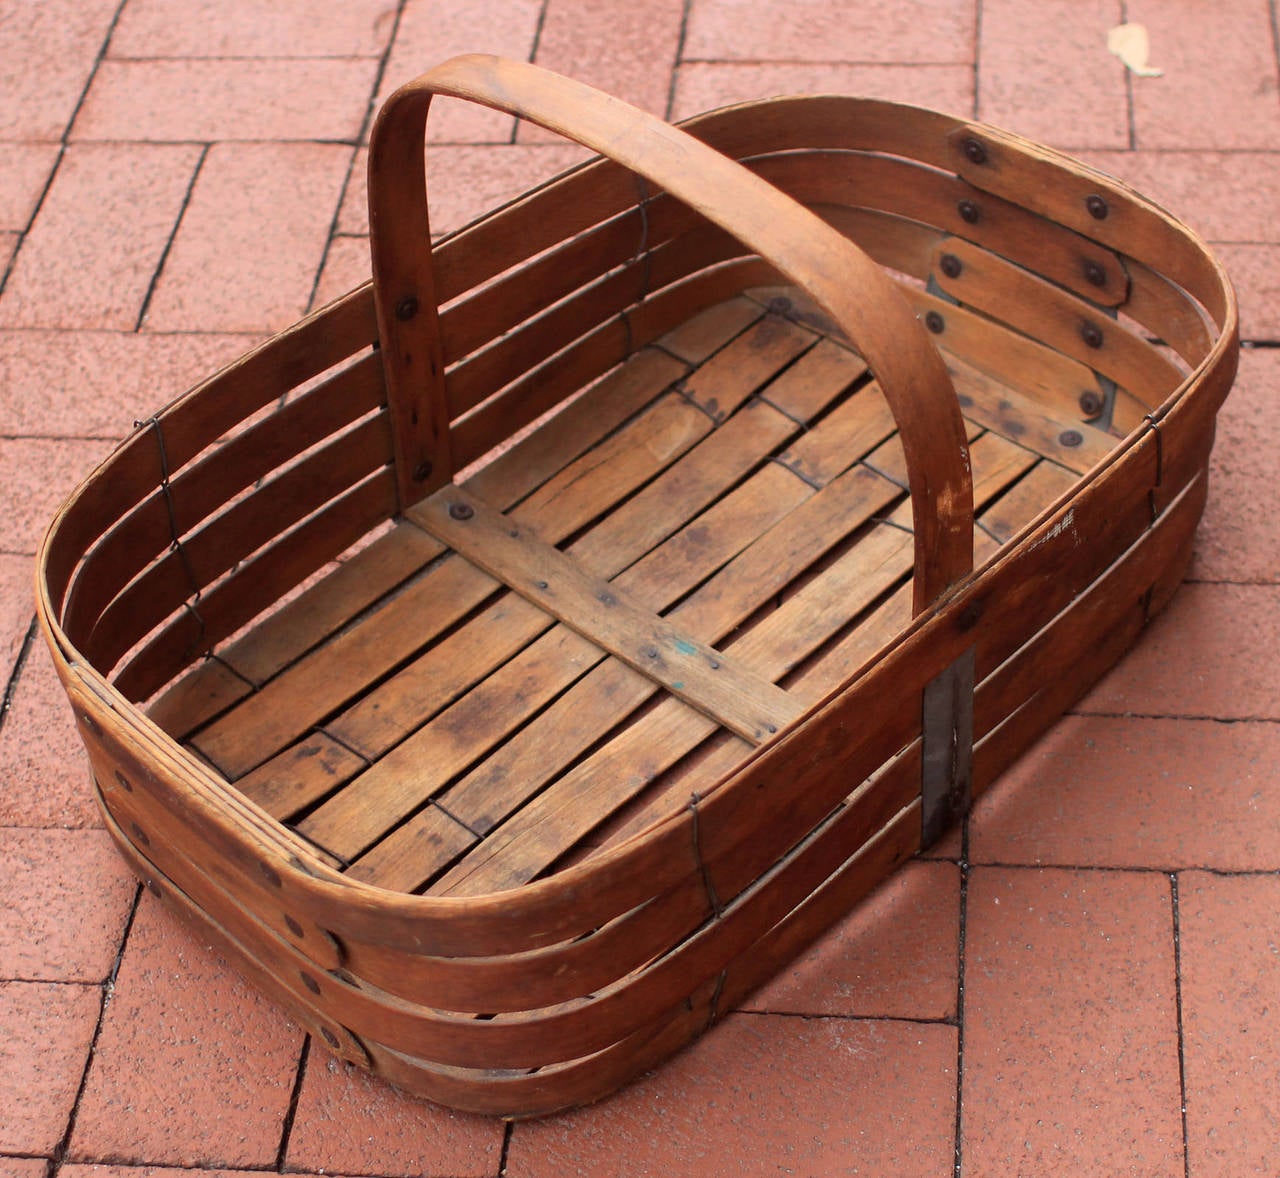 Handsome, oversized flat-bottom basket of slatted wood, metal and wire construction; American, late 19th century. Excellent patina.